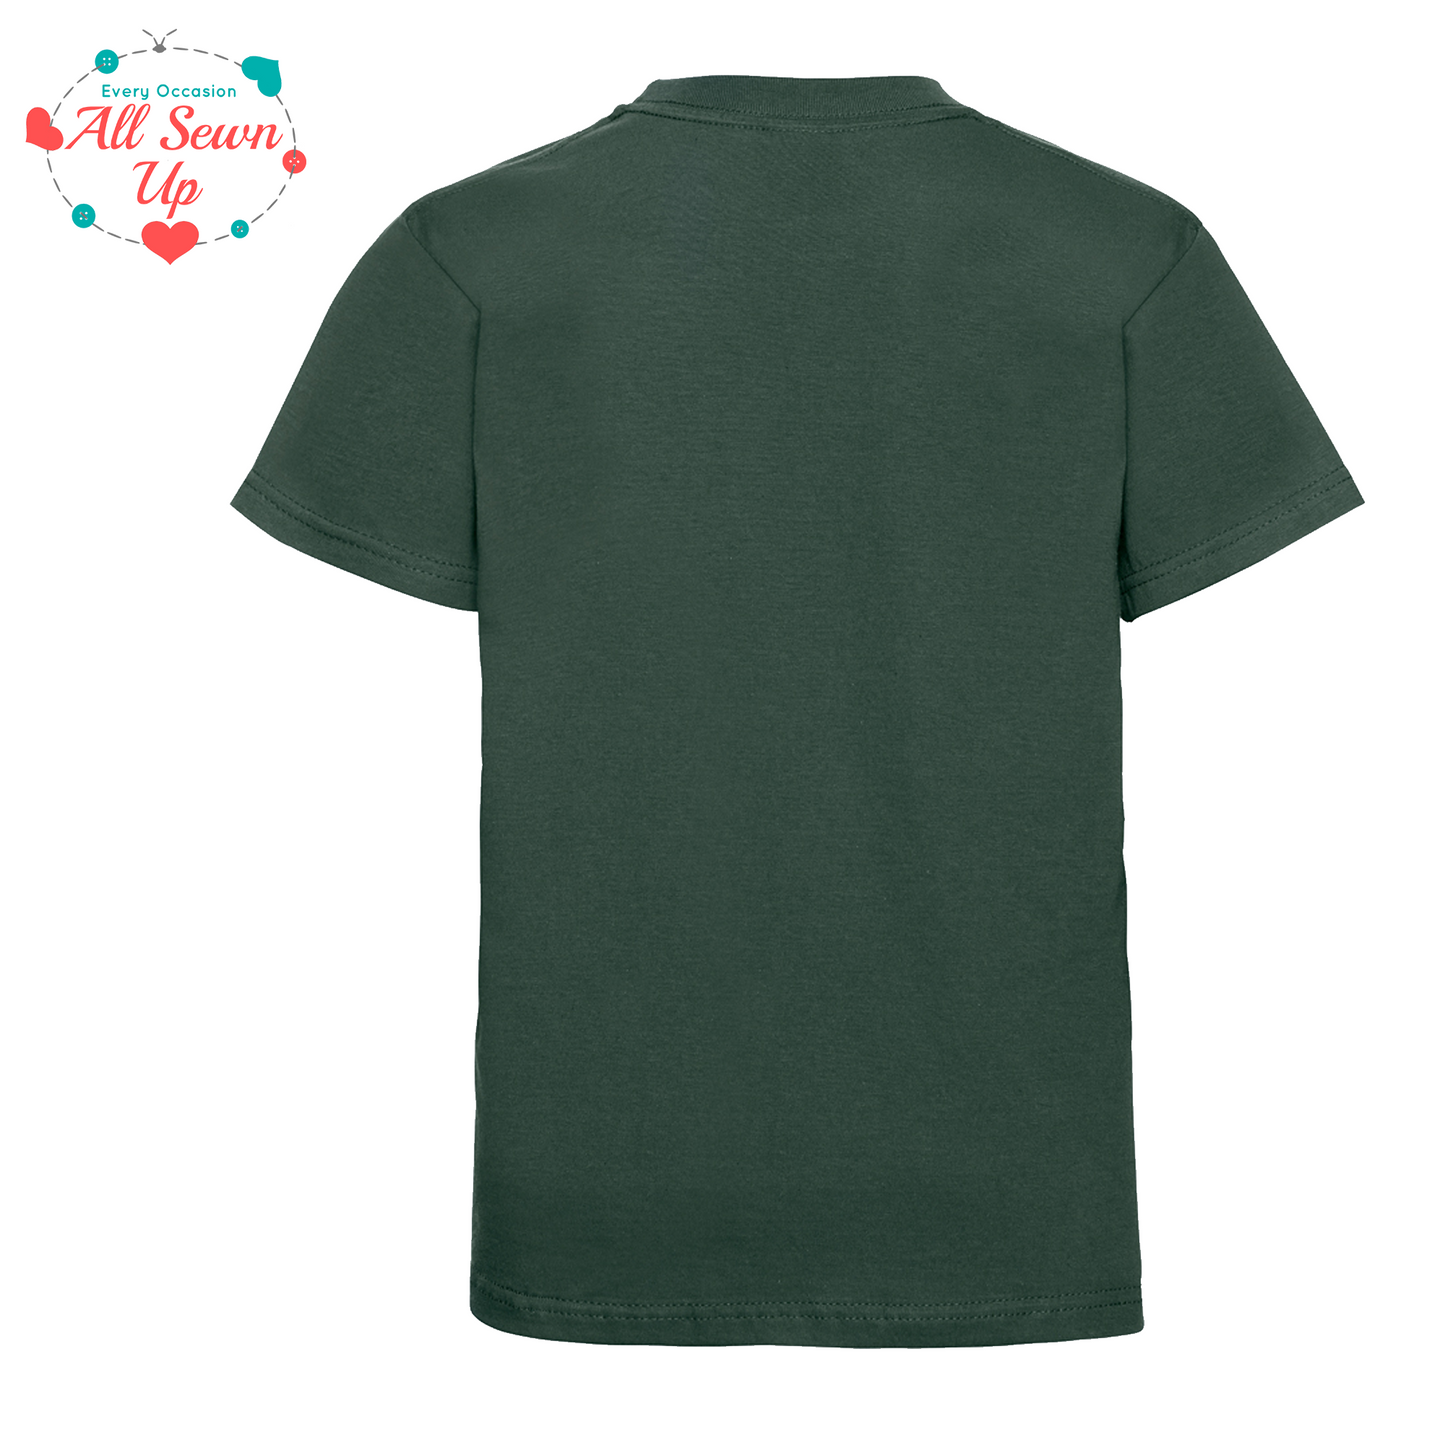 St Laurence Scouts - Bottle Green T-Shirt (Child and Adult)